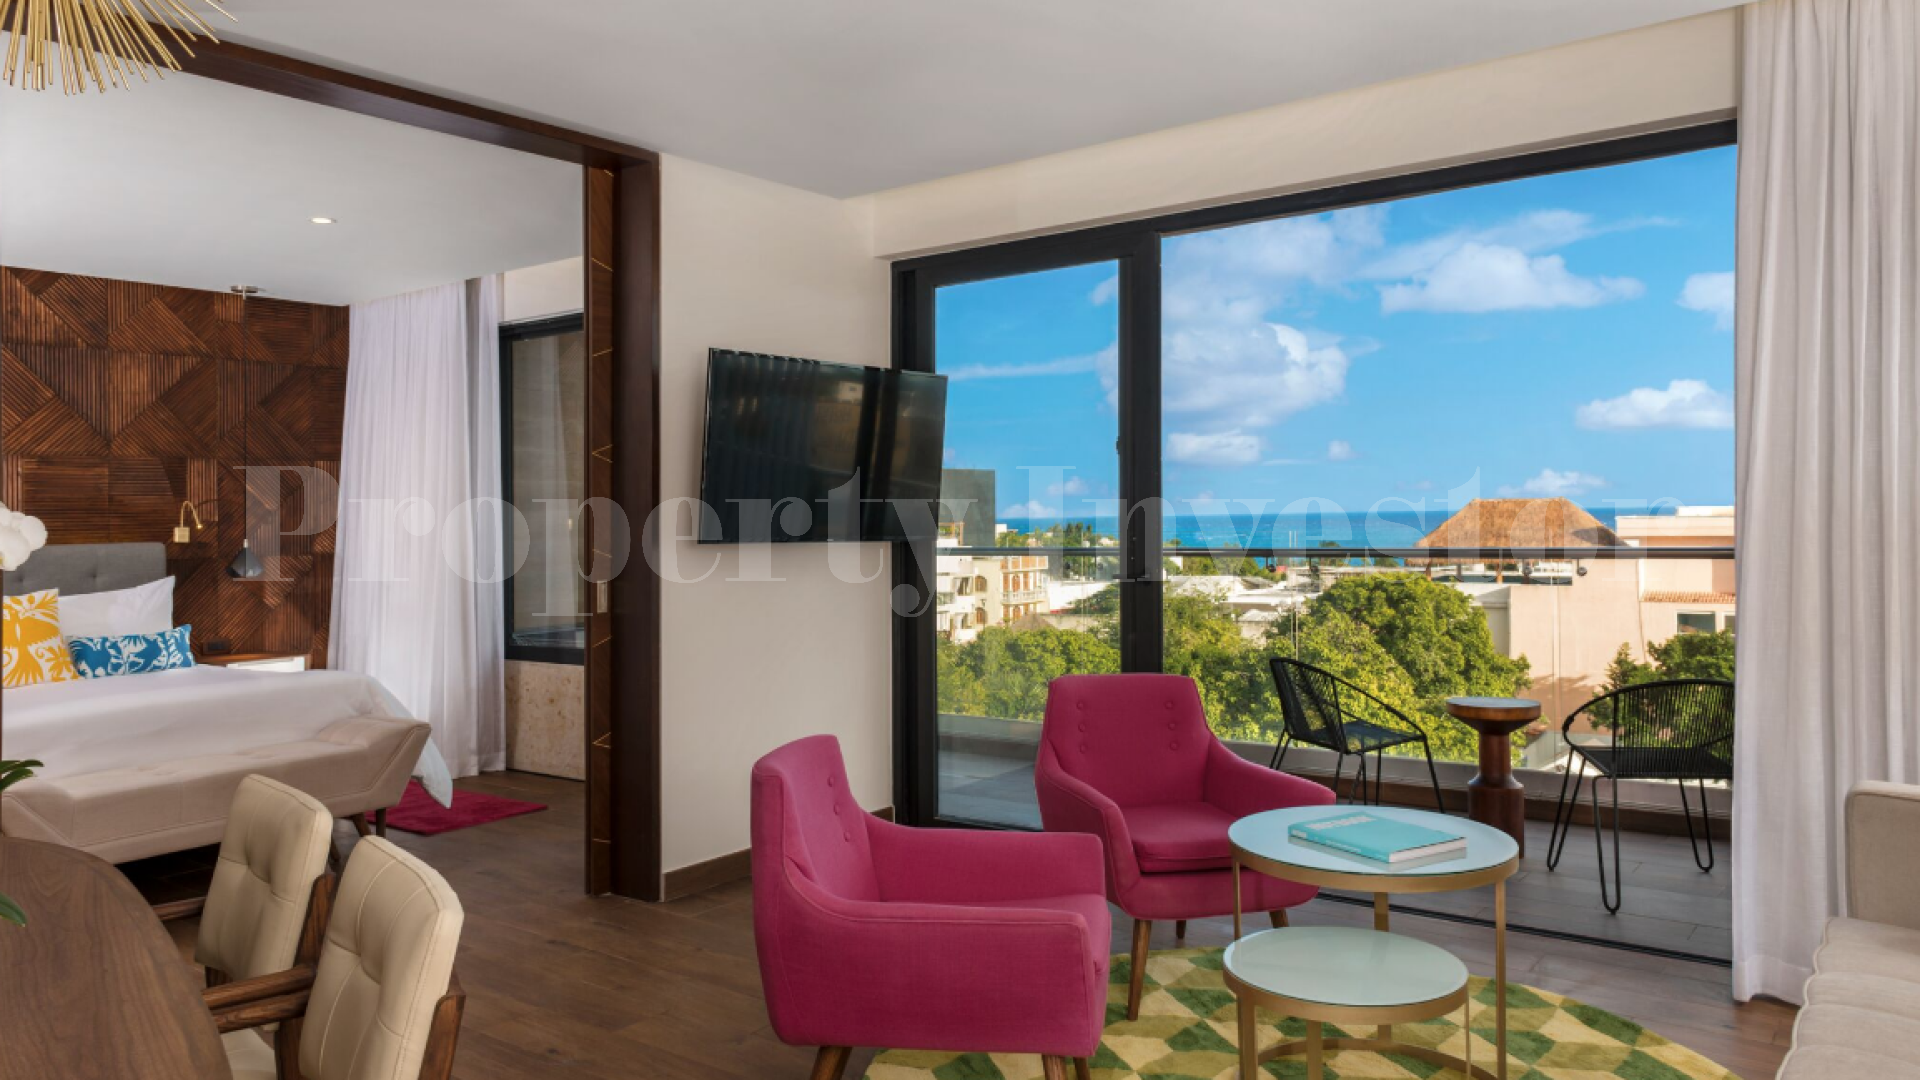 Exclusive 1 Bedroom Boutique Hotel Investment in Playa del Carmen (Unit 397)